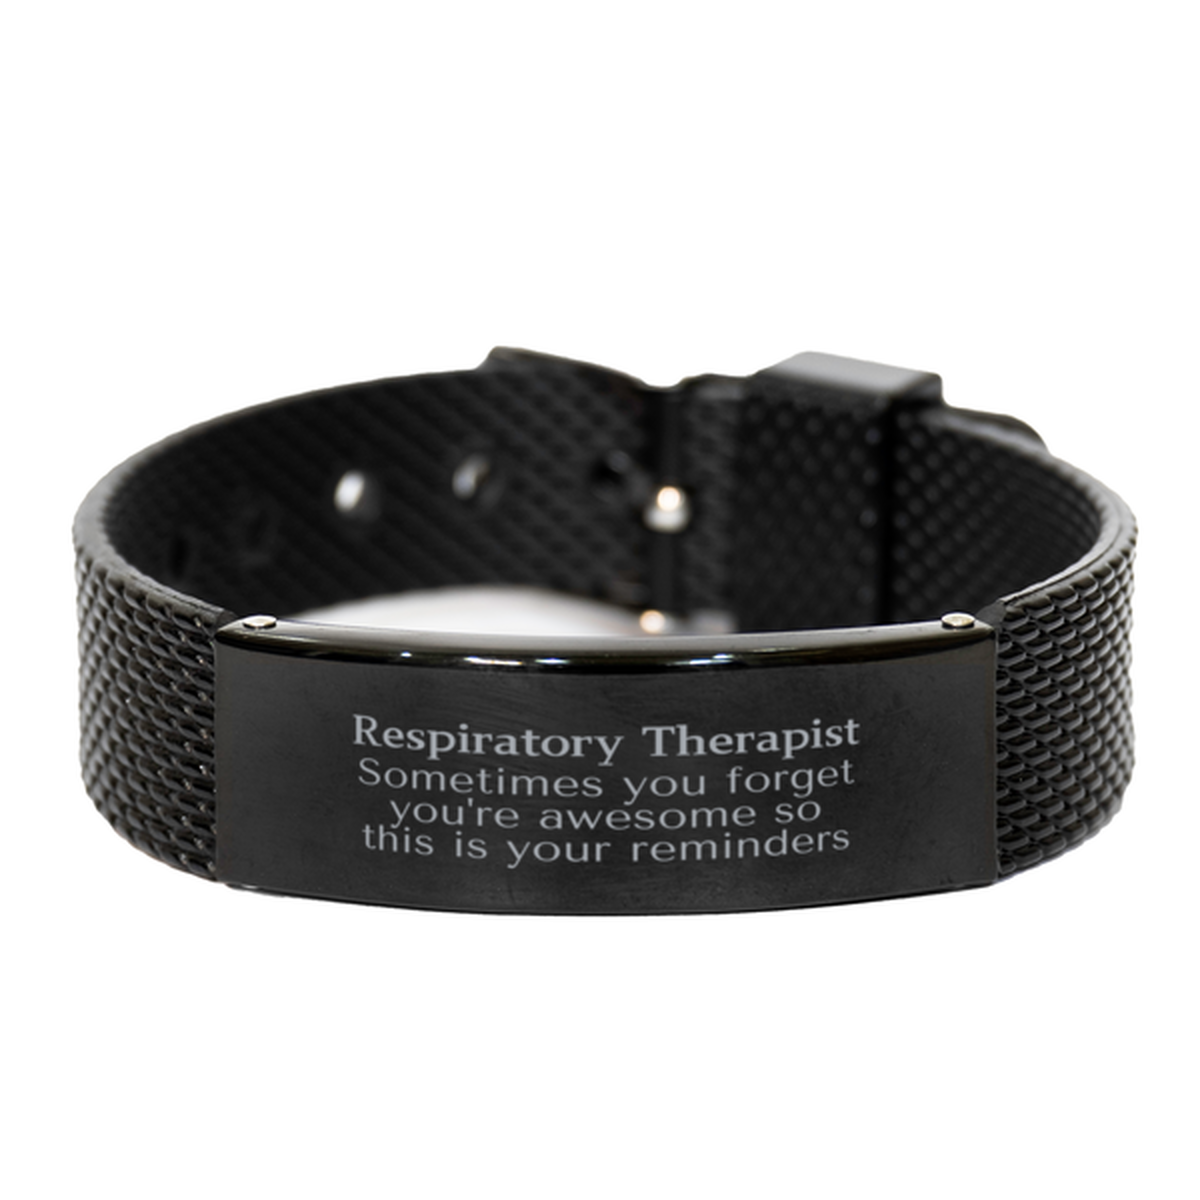 Sentimental Respiratory Therapist Black Shark Mesh Bracelet, Respiratory Therapist Sometimes you forget you're awesome so this is your reminders, Graduation Christmas Birthday Gifts for Respiratory Therapist, Men, Women, Coworkers